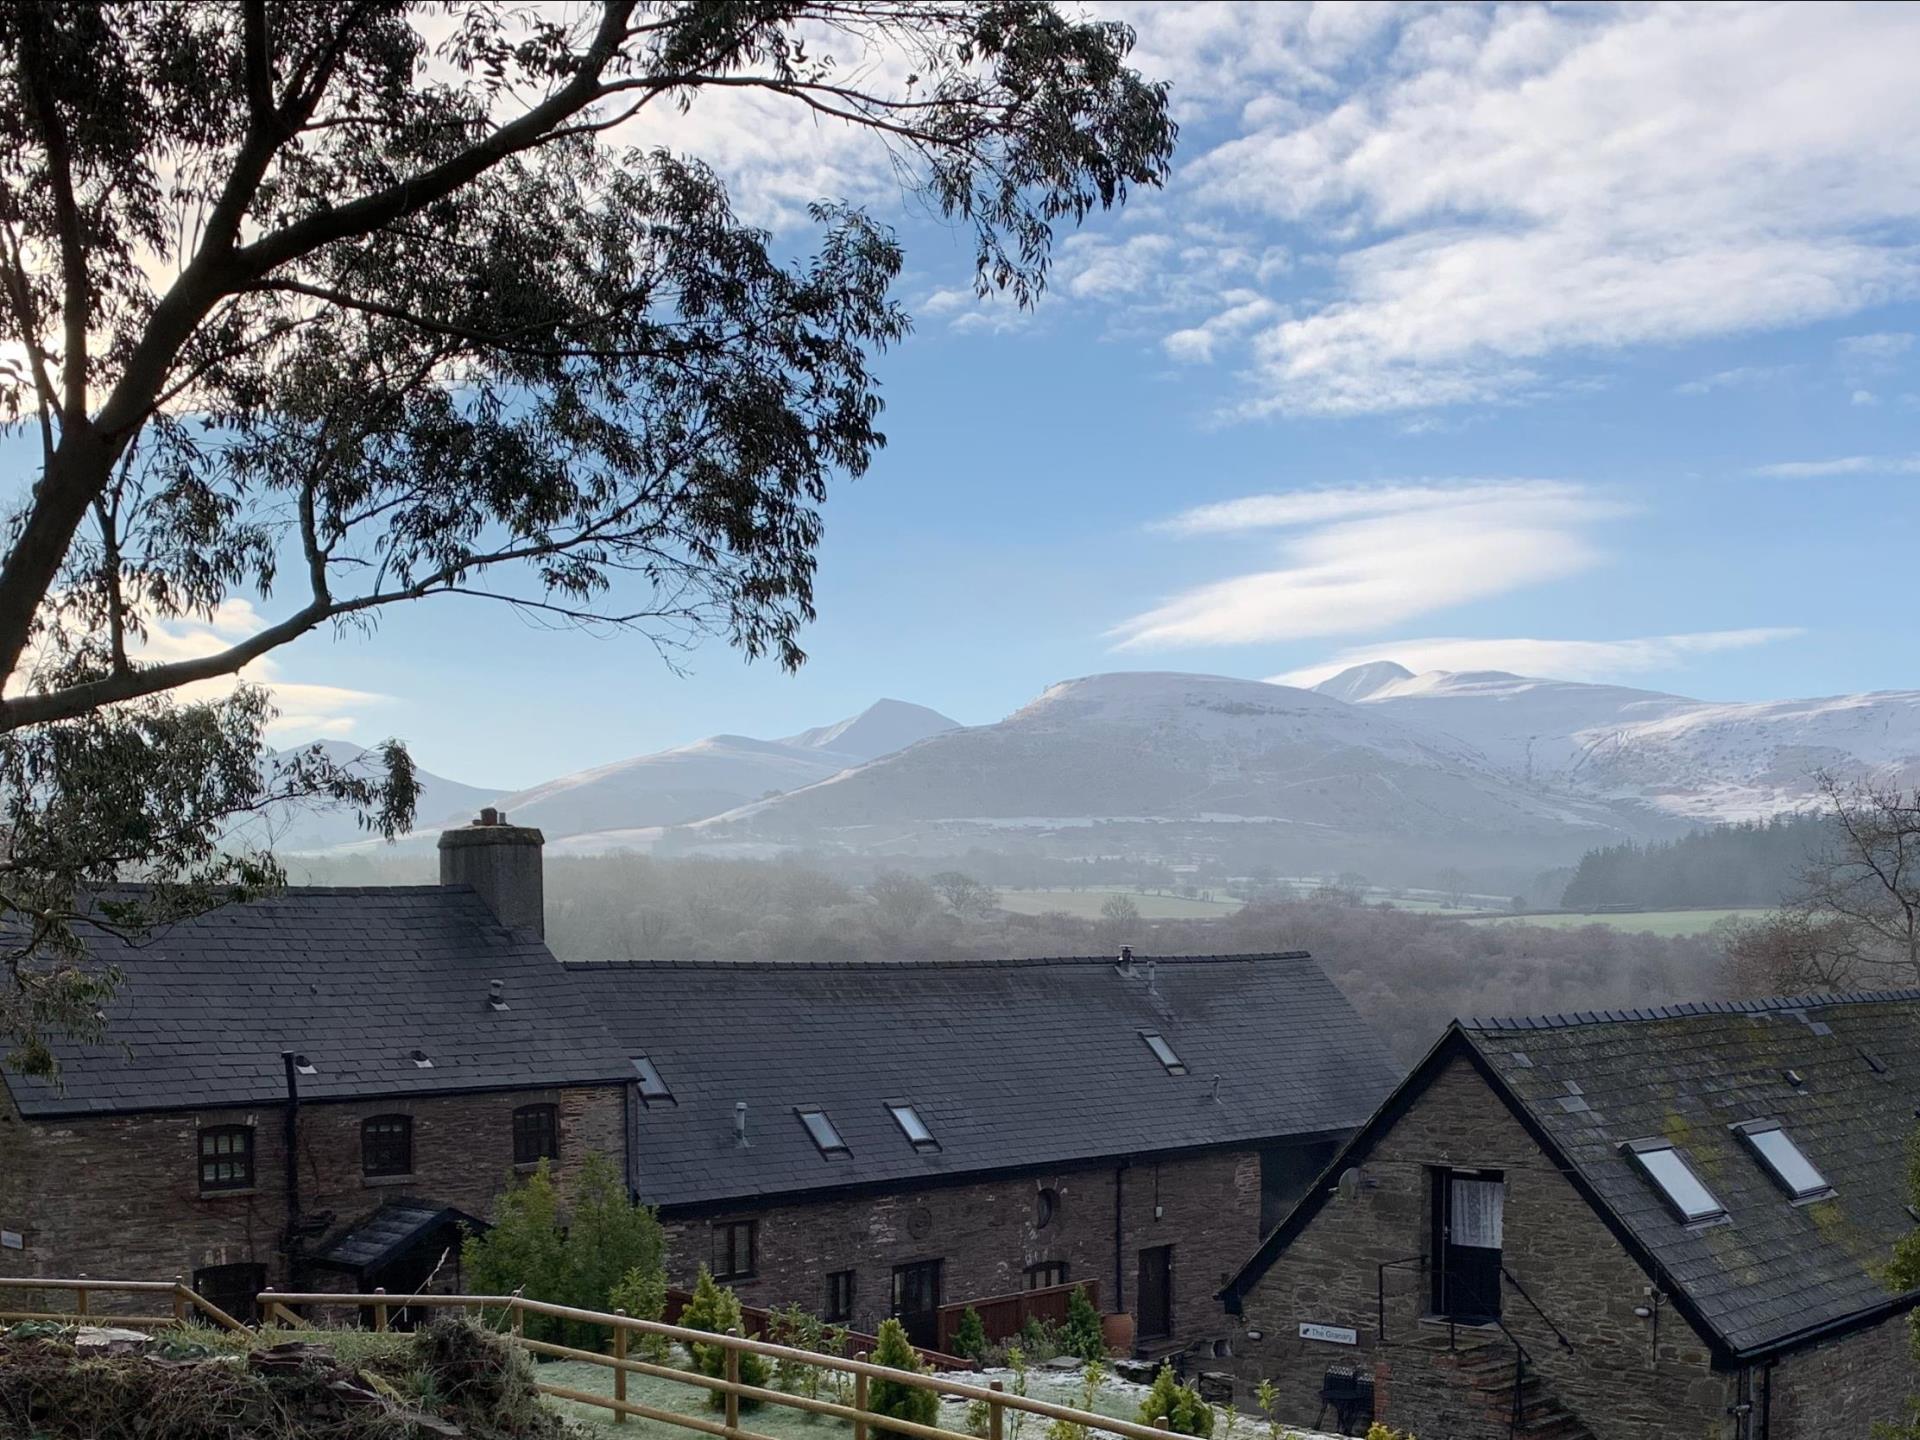 Hilltops Brecon Holiday Cottages